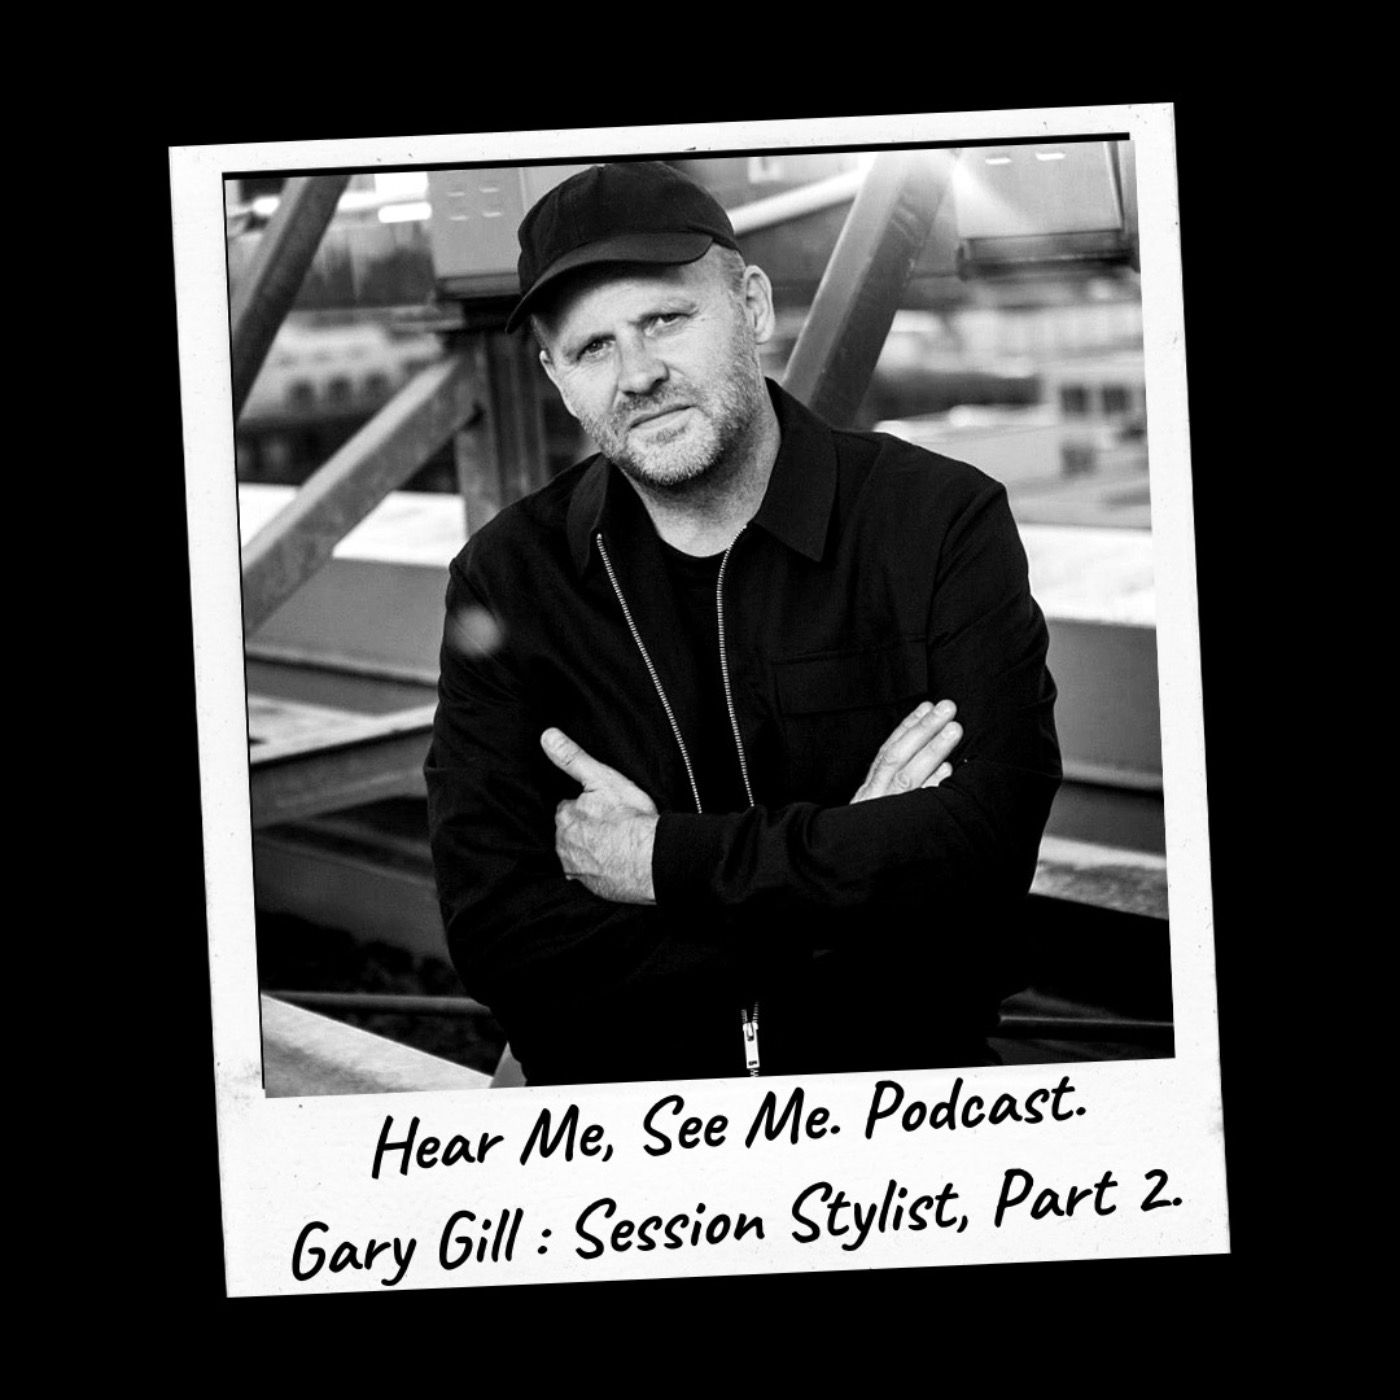 cover art for “Hear Me, See Me.” Podcast. Gary Gill part 2.